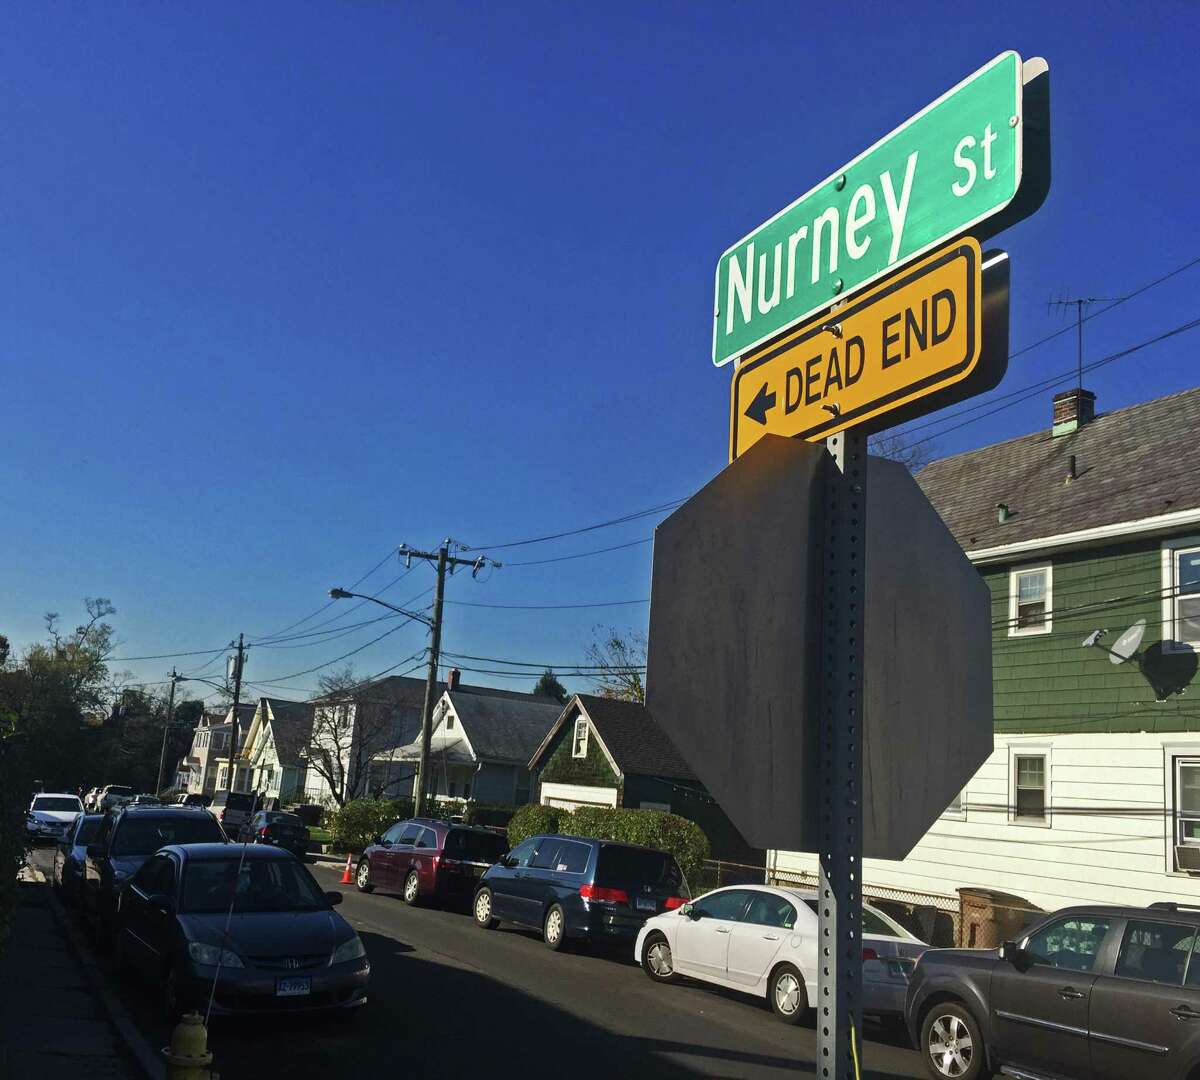 Nurney Street on the West Side of Stamford, Connecticut, was named in 1922 in honor of Mary Camilla Nurney, a nurse who died after treating soldiers for influenza in the city in 1918.